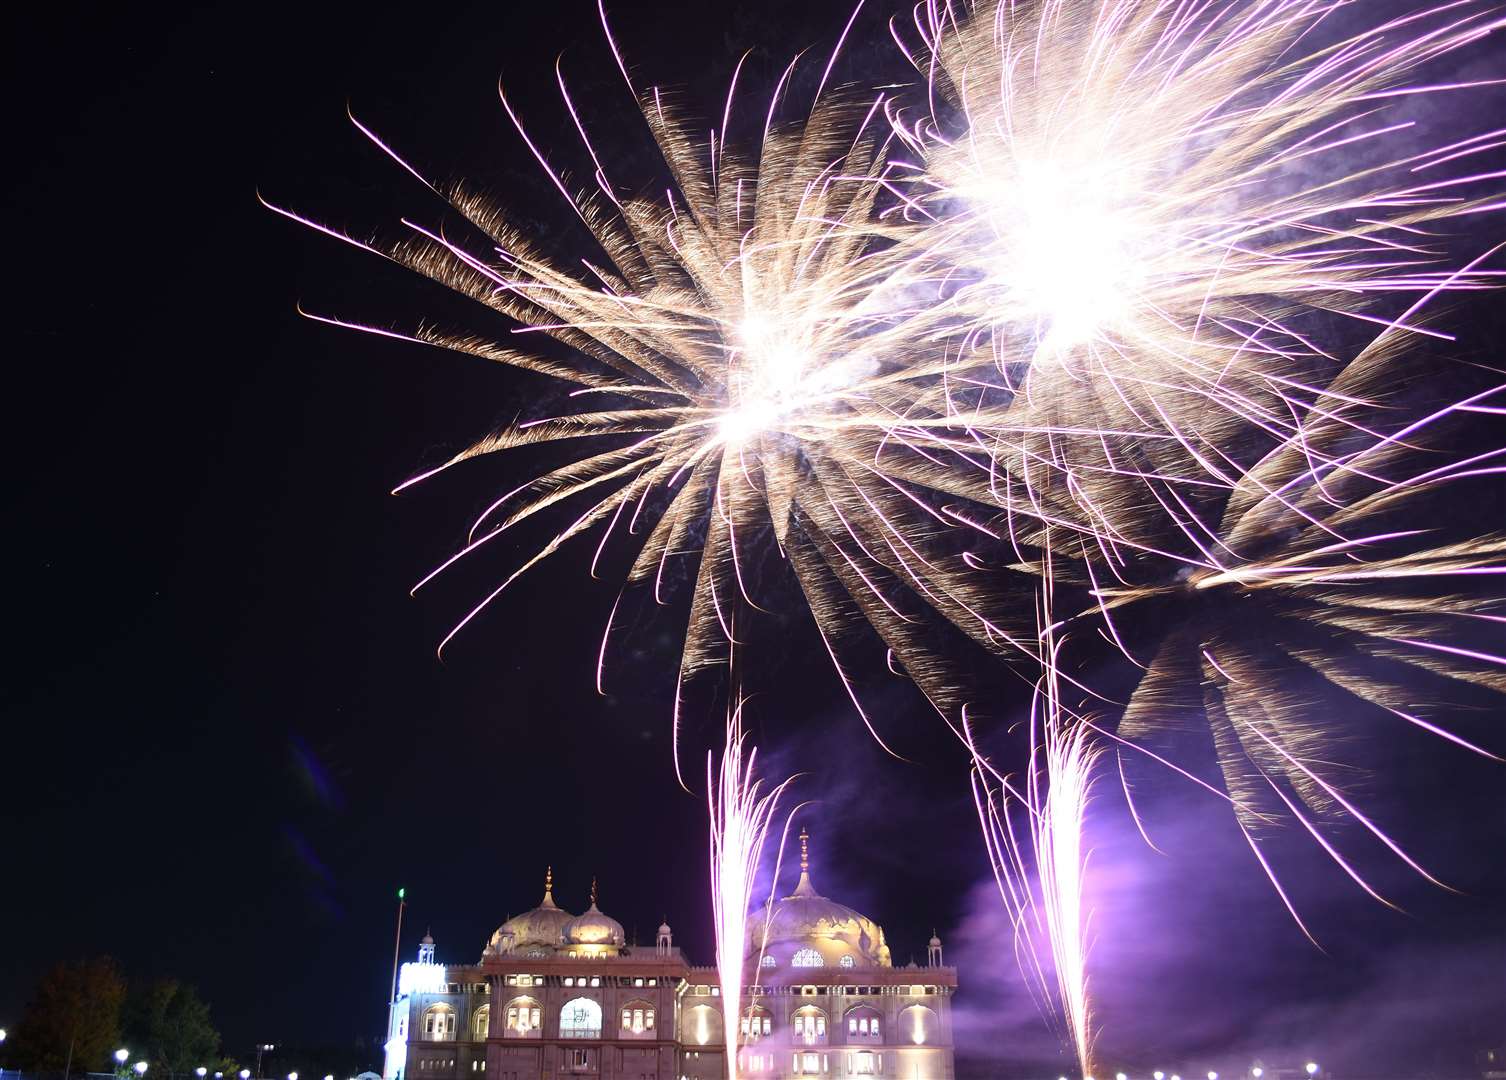 Fireworks outside the Gurdwara in Gravesend at a previous event